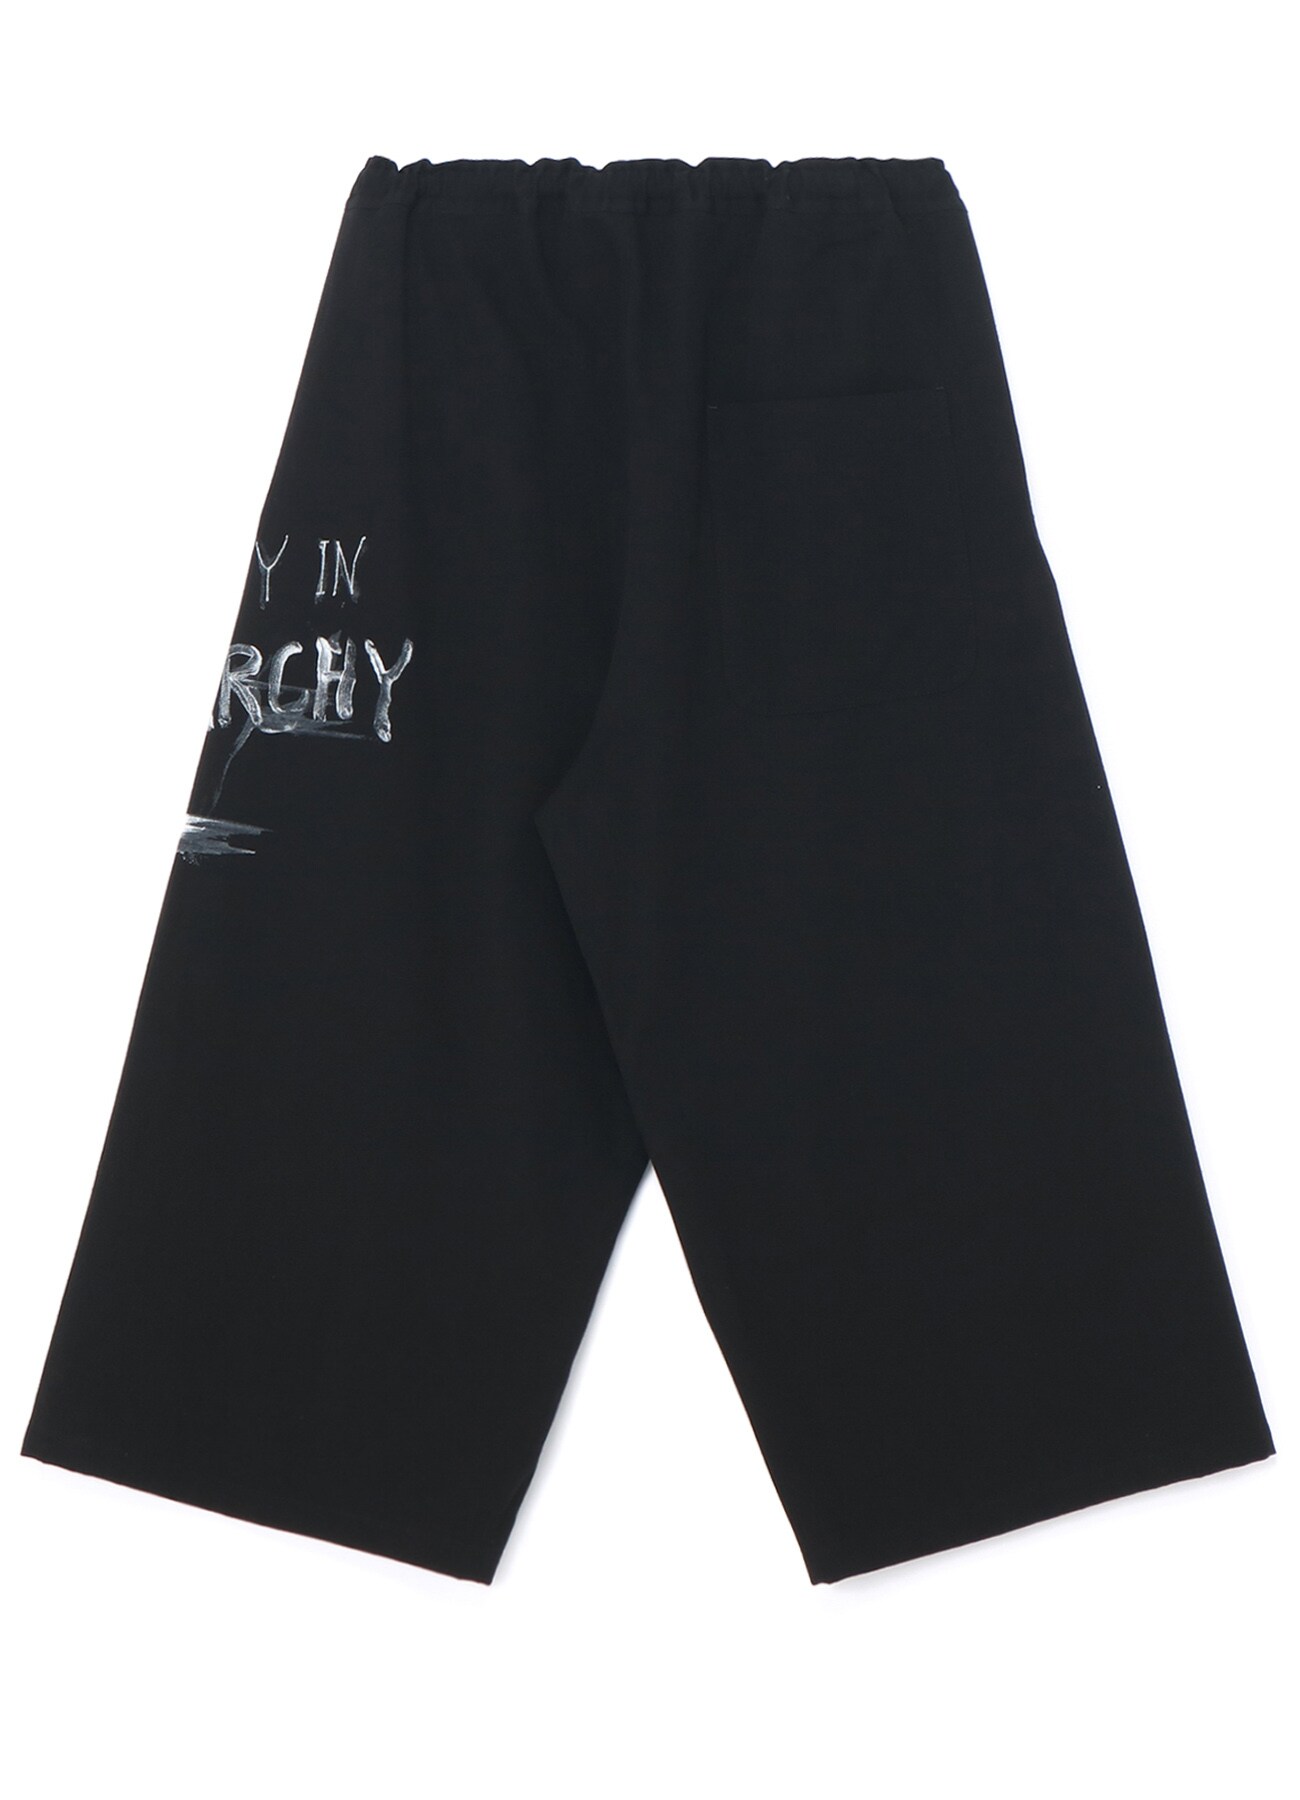 "FIND THE BEAUTY IN MY ANARCHY" PANTS